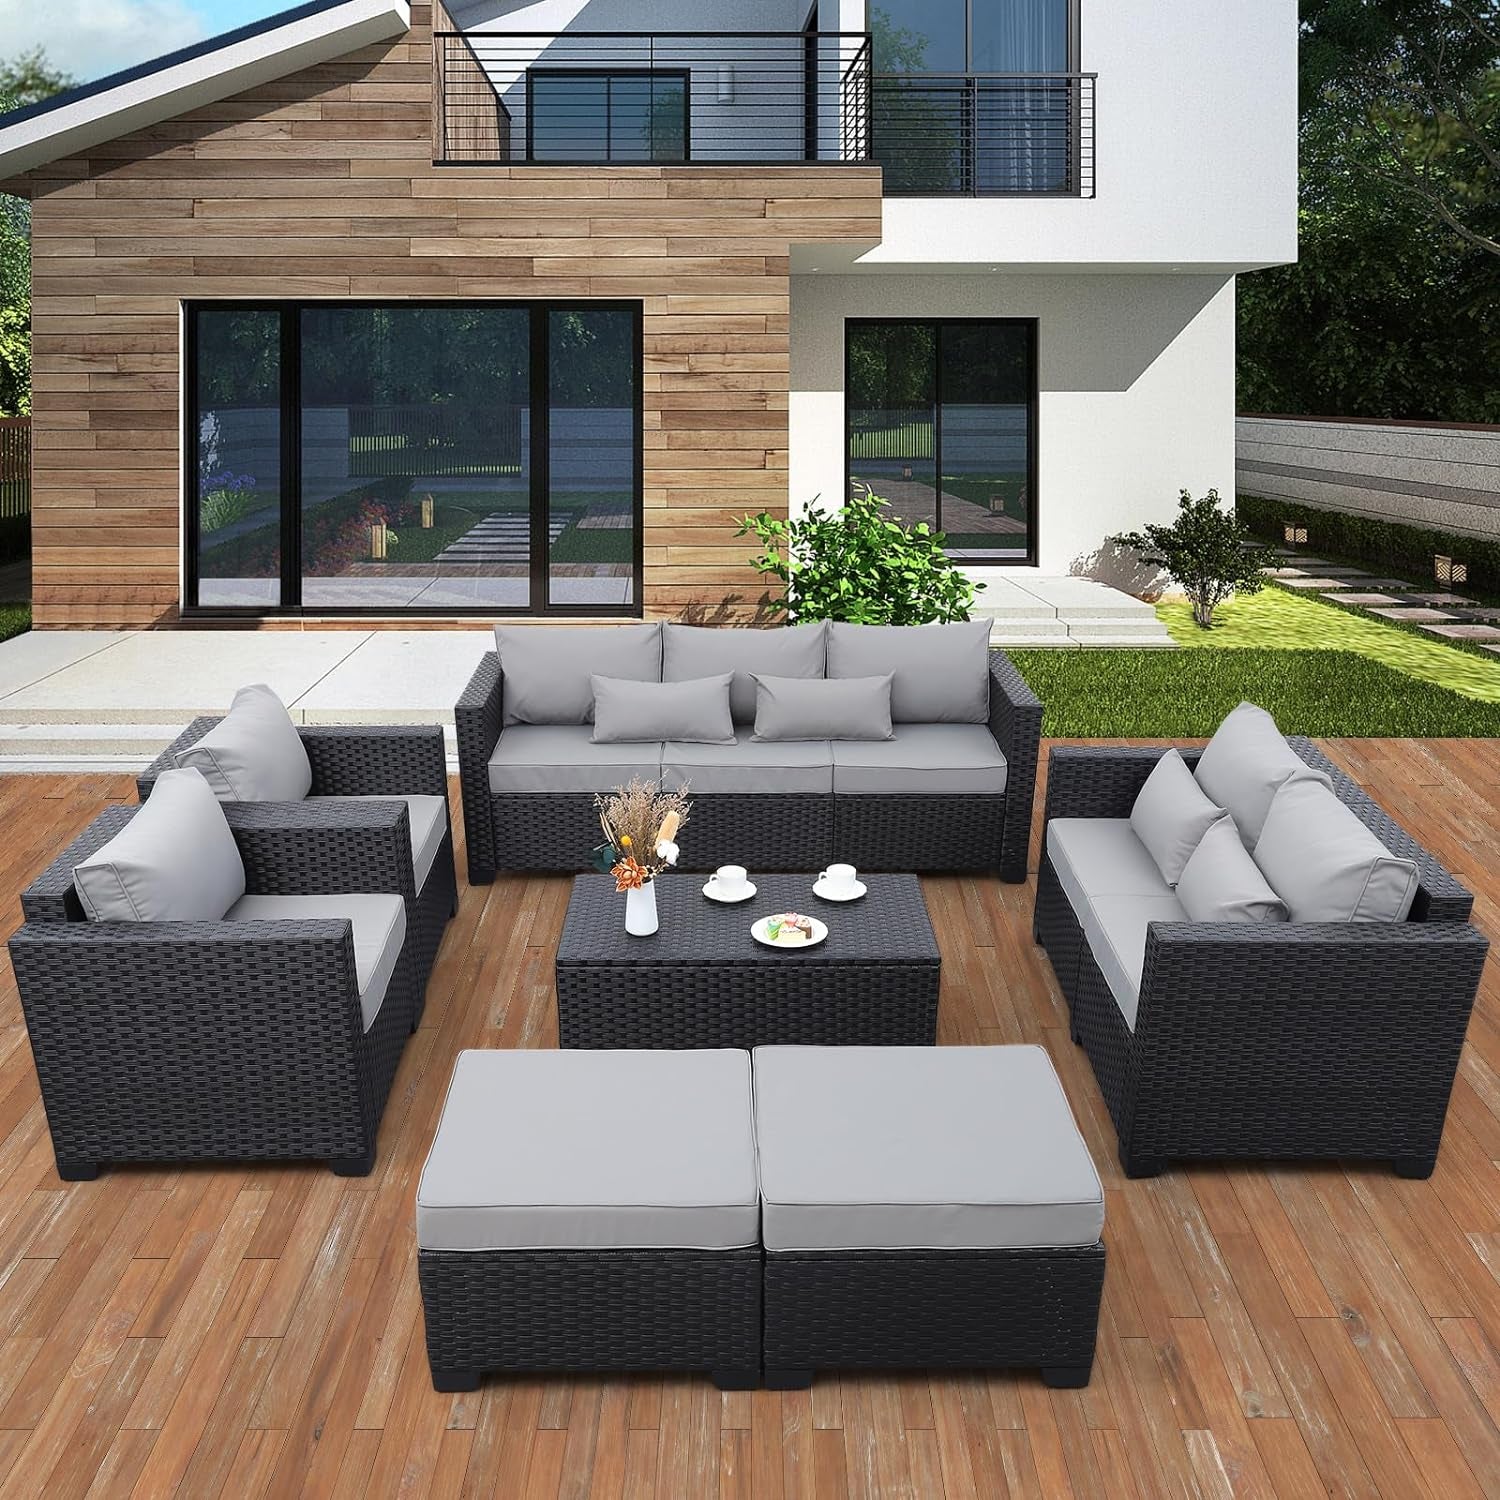 Patio Furniture Sets 7 Pieces Outdoor Furniture Sectional Patio Couches Set Storage Table No-Slip Grey Cushions and Waterproof Covers